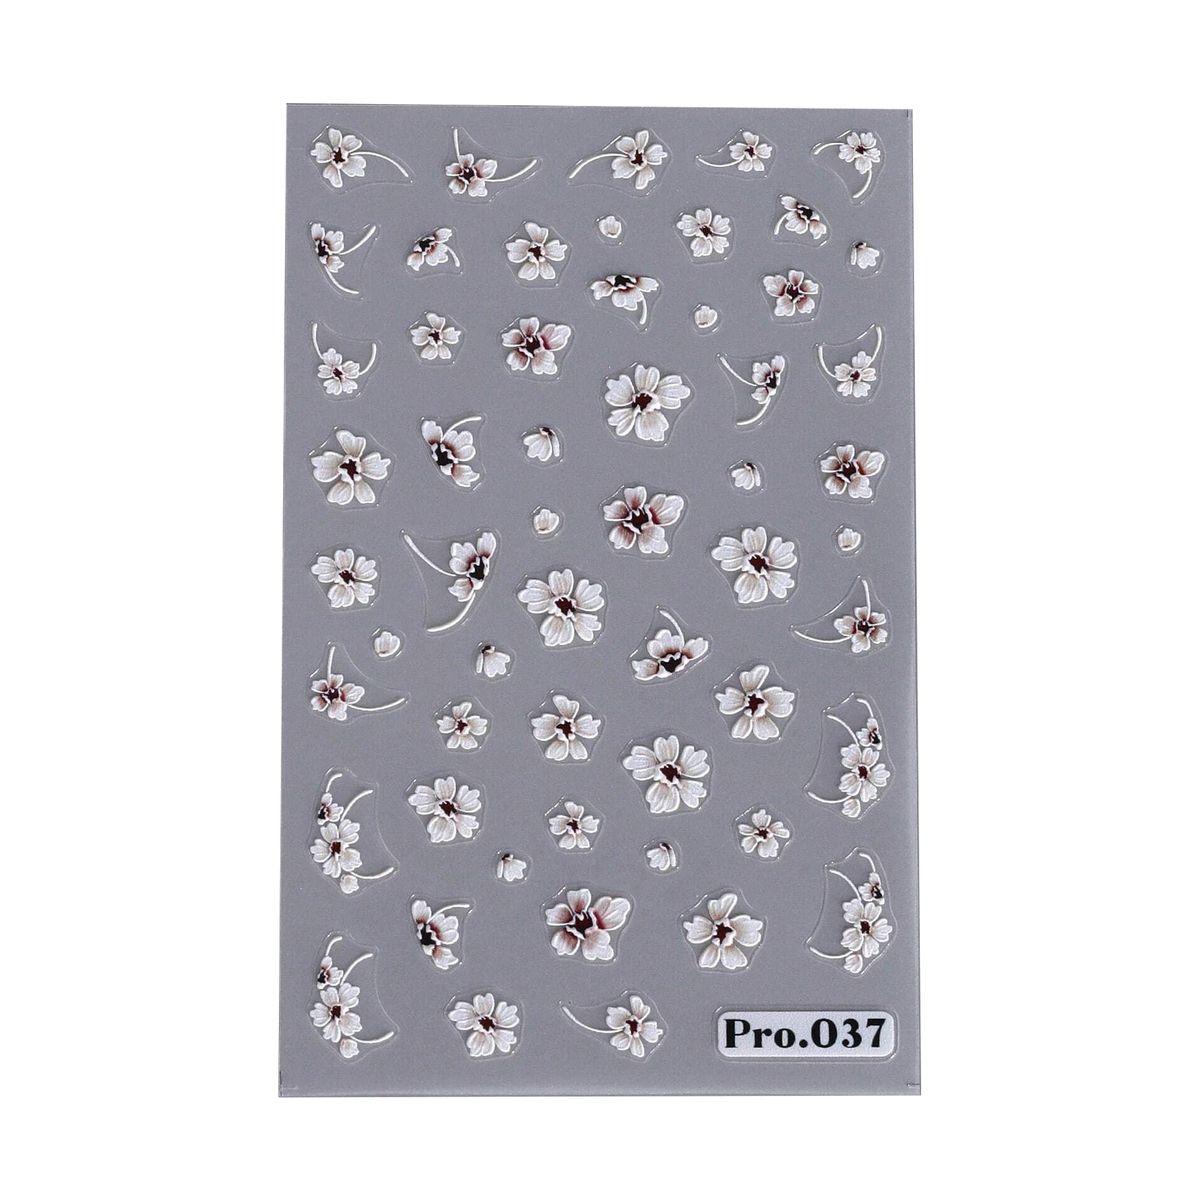 Nail Art Stickers - White Flowers | Shop Today. Get it Tomorrow ...